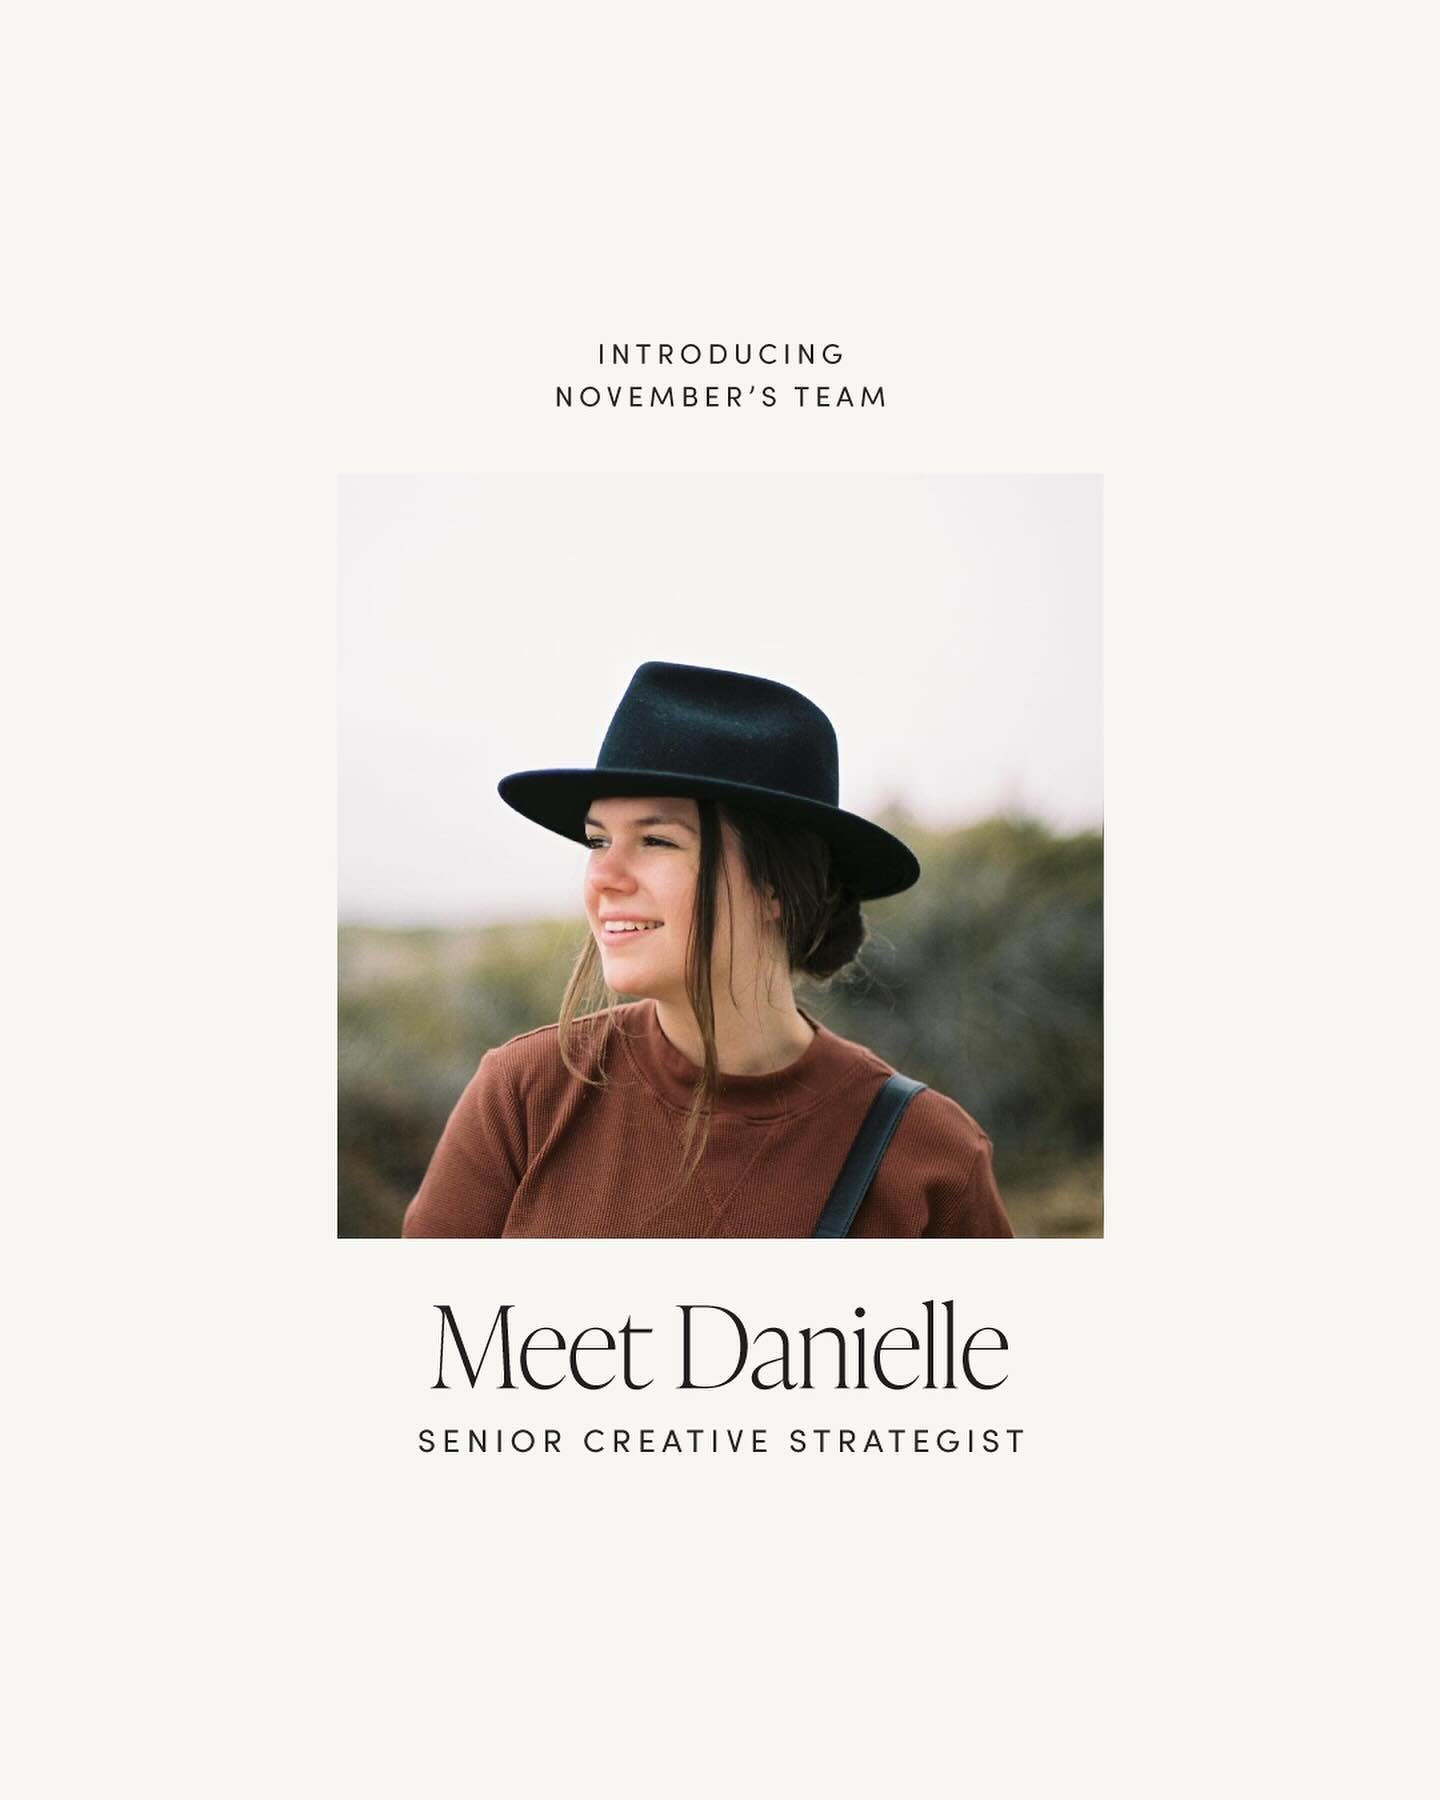 Meet our Senior Creative Strategist, Danielle!

With a keen eye for detail and 6 years of close collaboration with marketing teams and business owners, Danielle elevates every project she touches. Beyond her talent, Danielle&rsquo;s warmth and collab